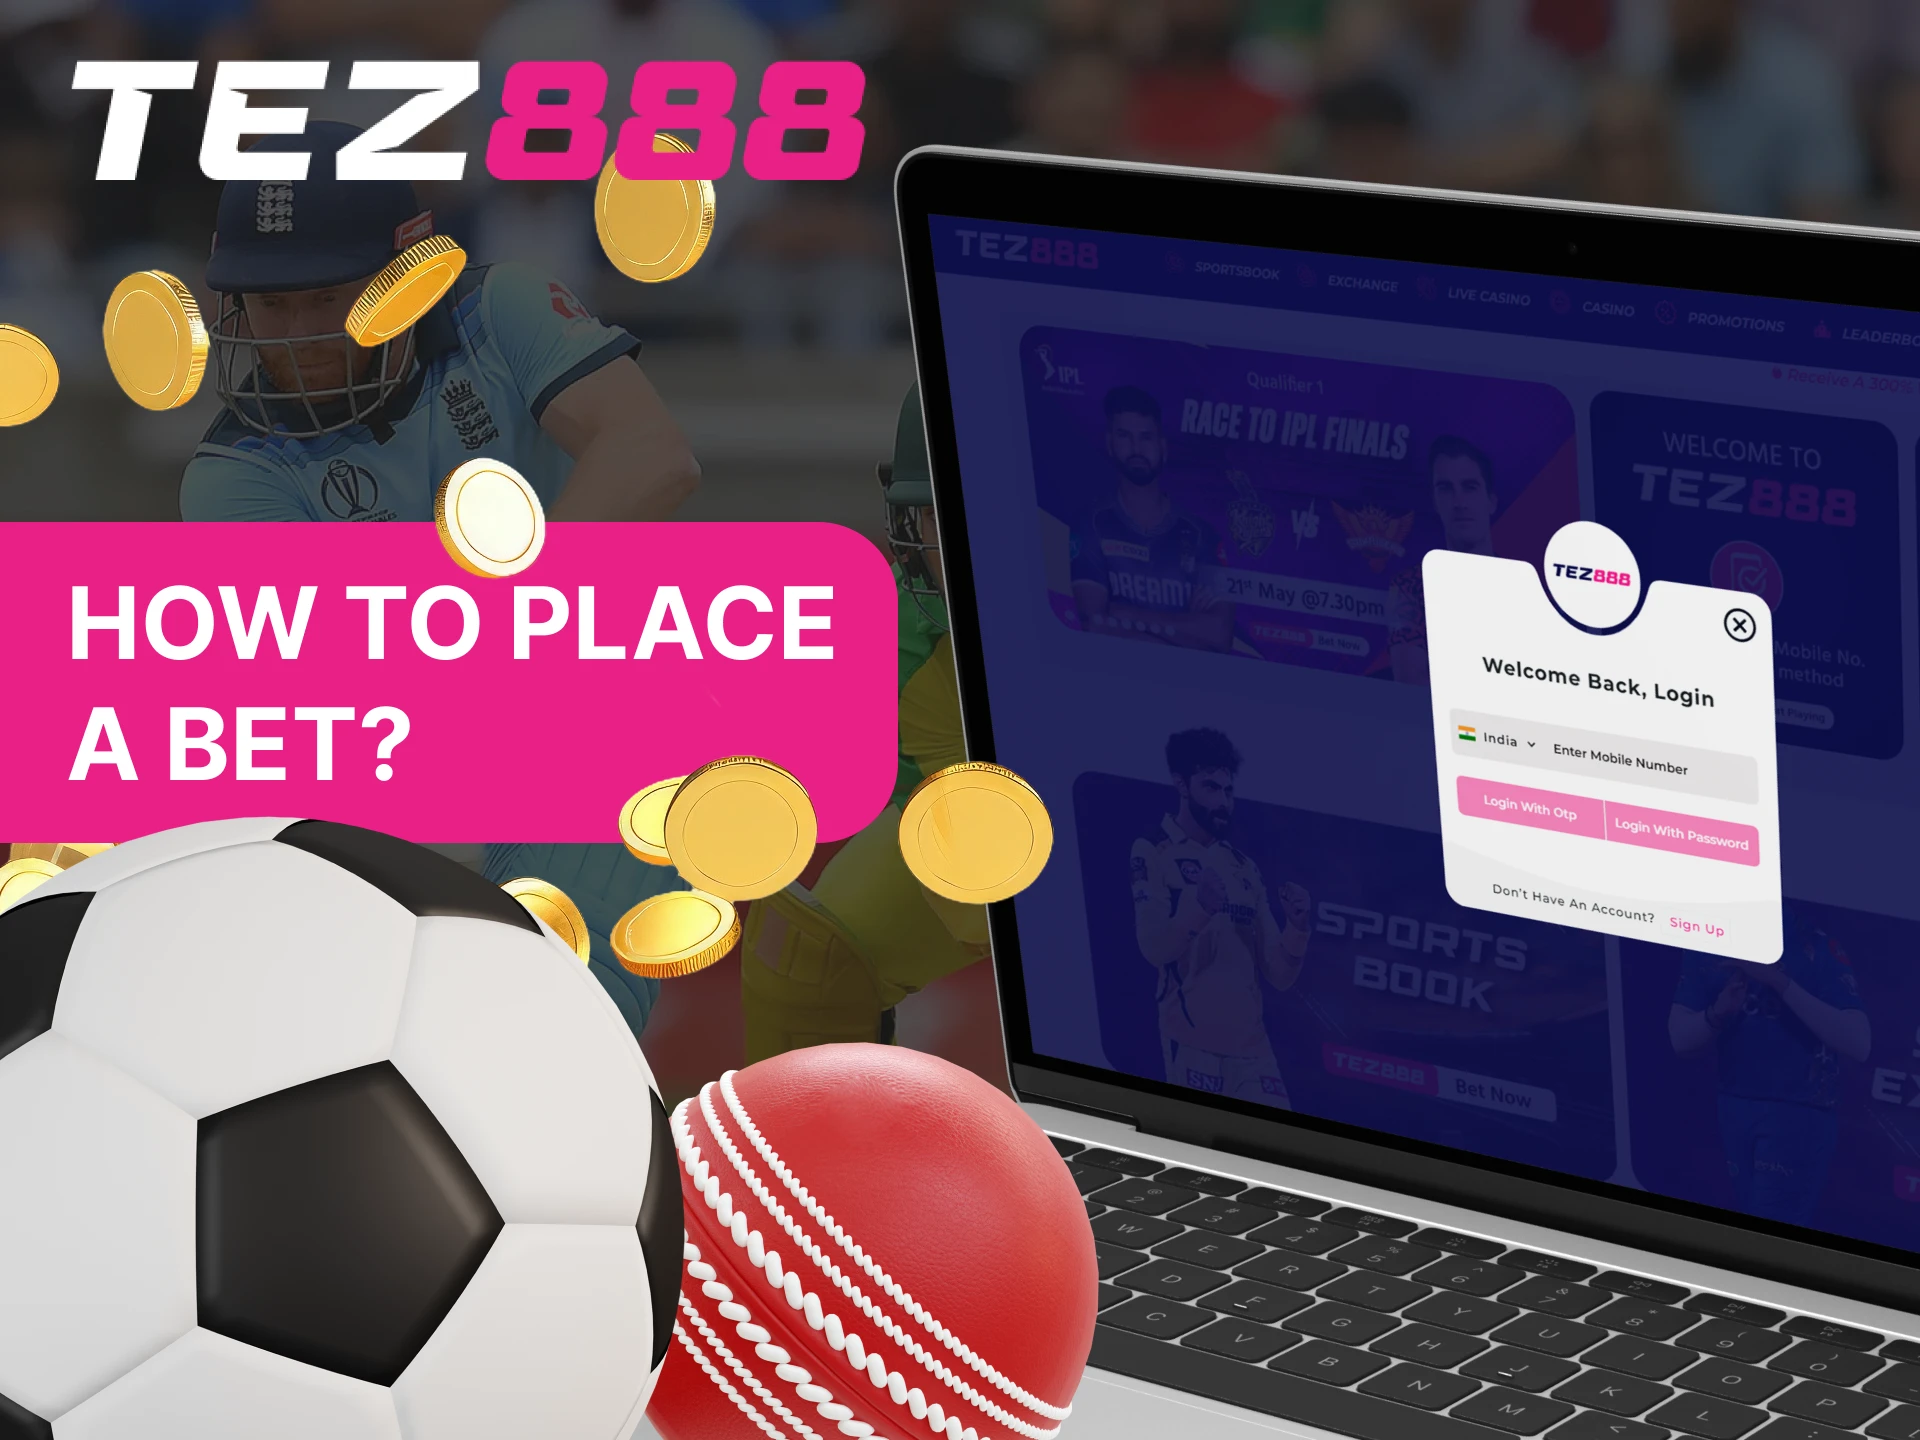 Follow this guide to bet on Tez888.